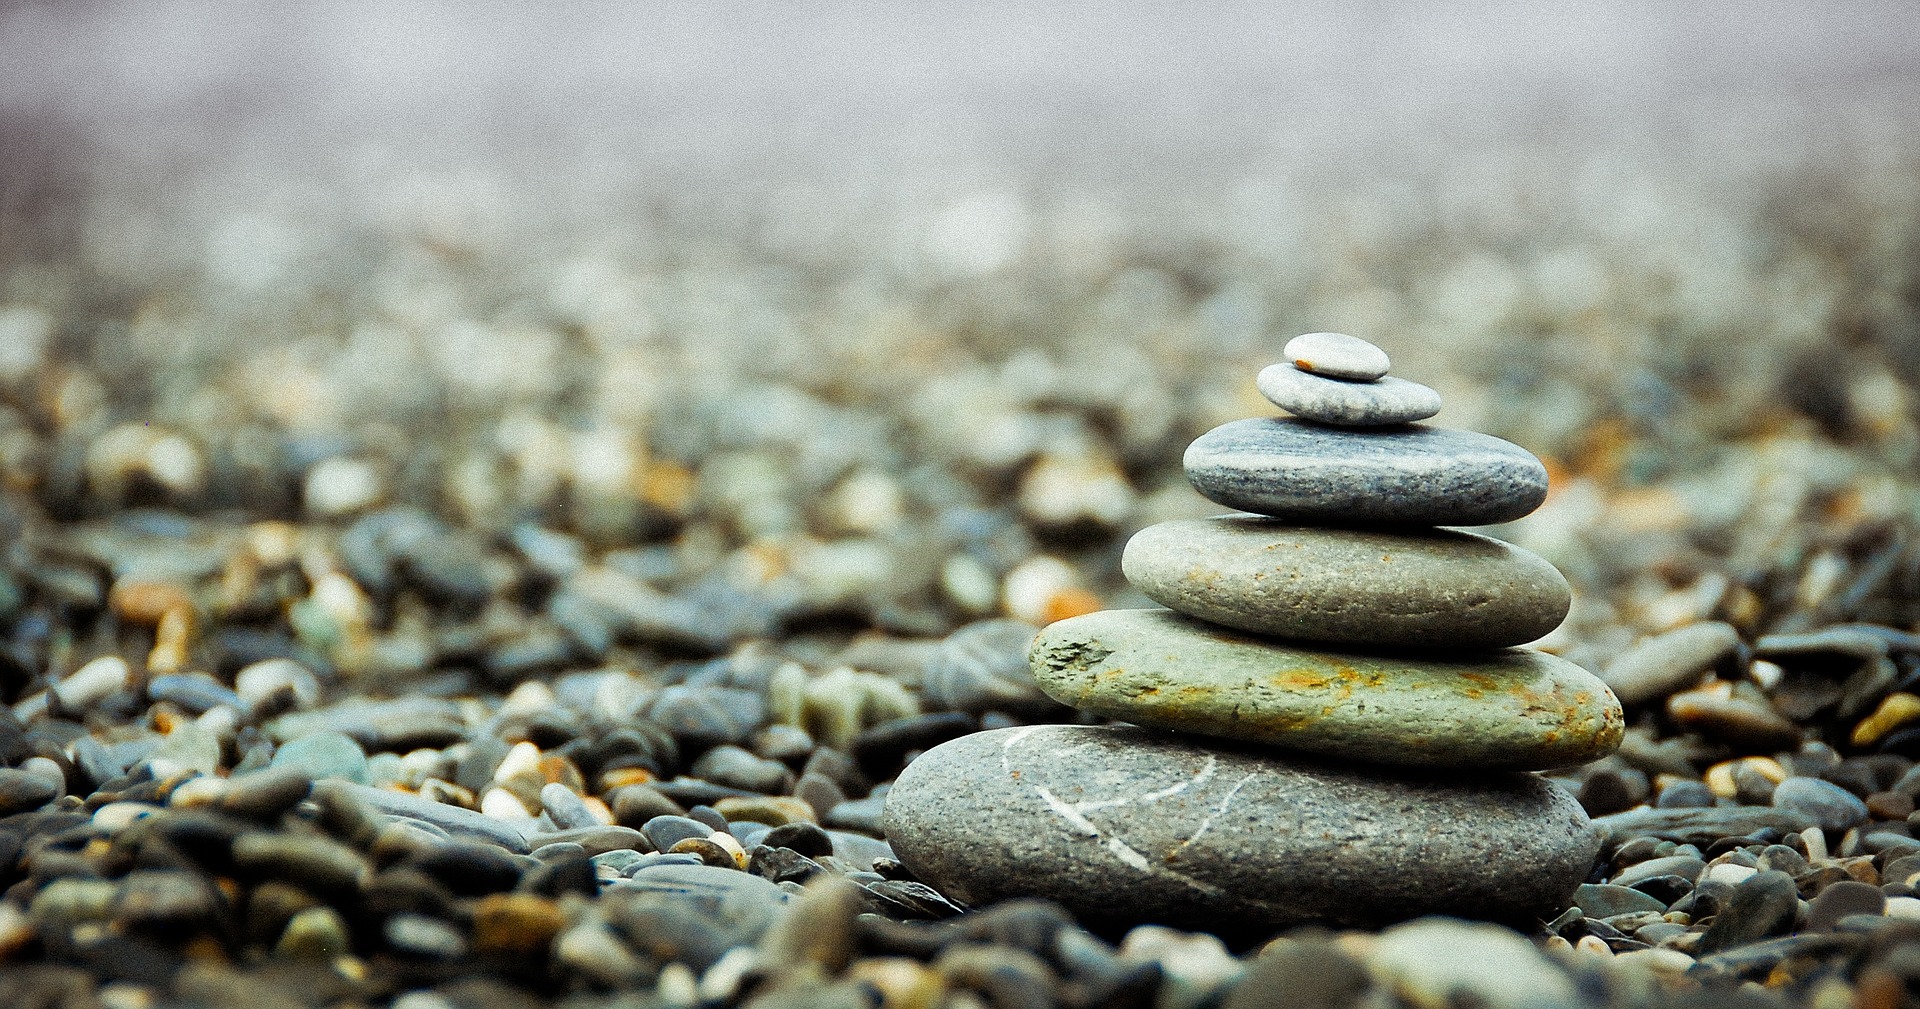 Stacking stones is meditative